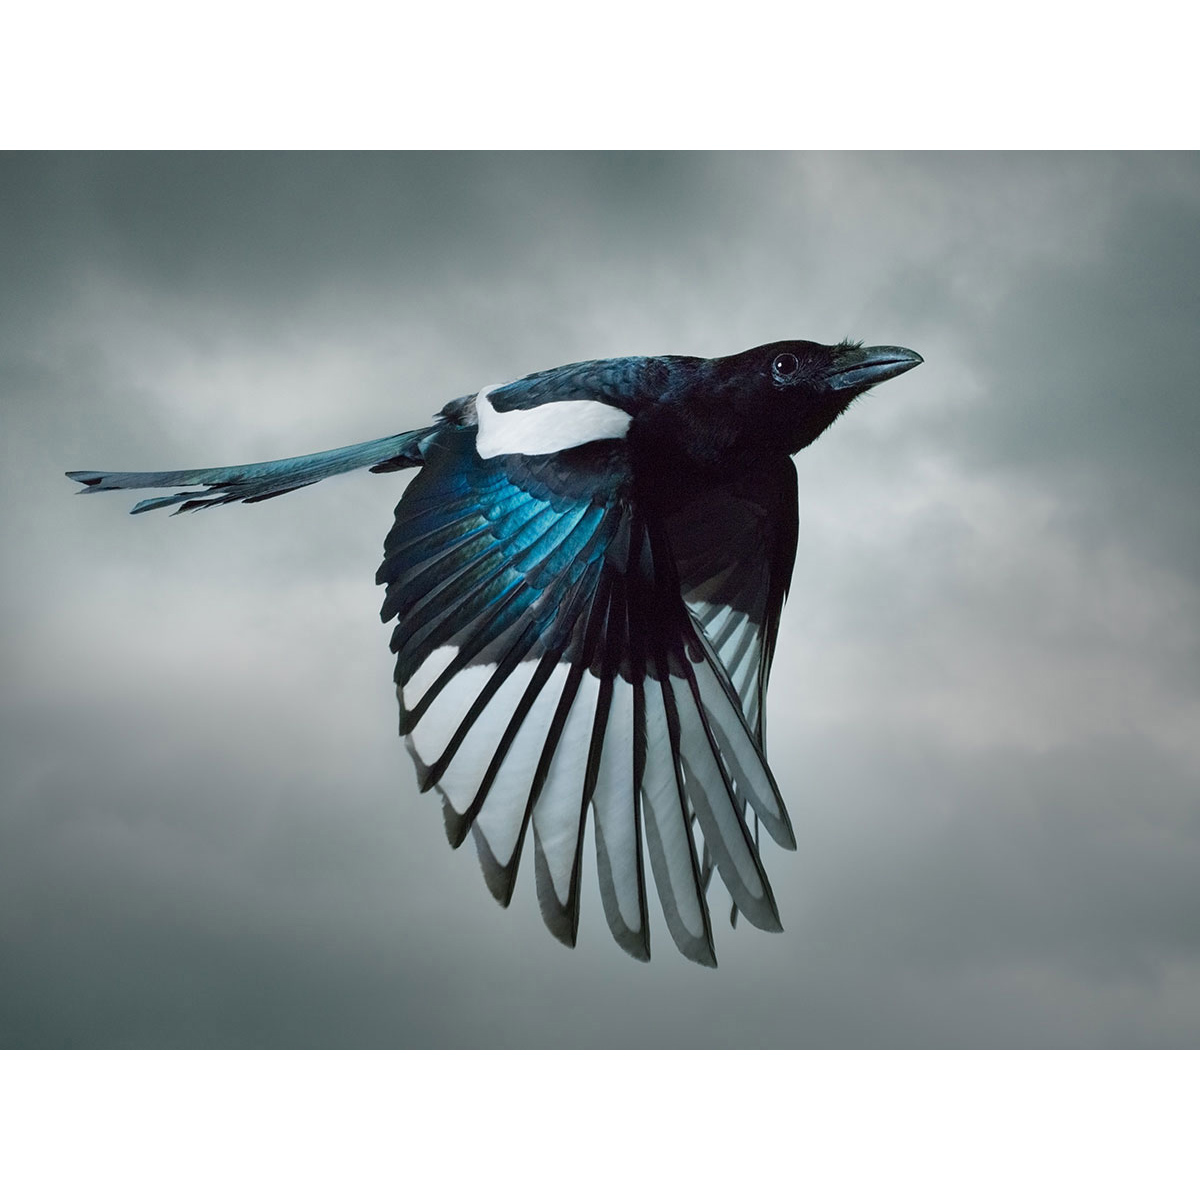 Mark-Harvey-photography_In-Flight-collection-MAGPIE_lowres1